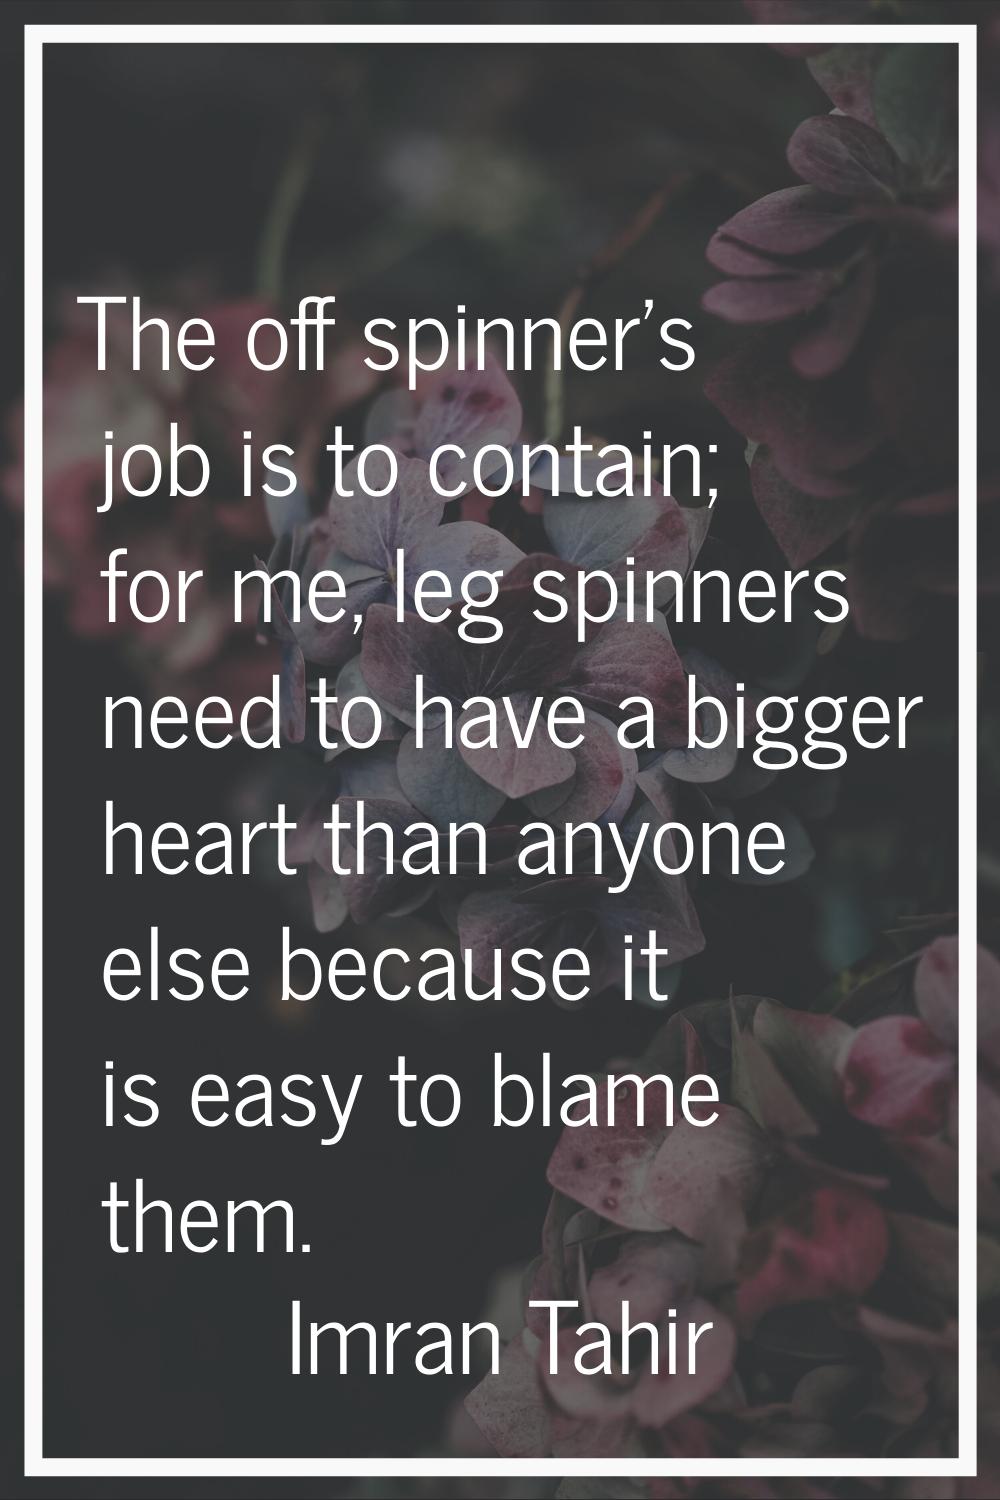 The off spinner's job is to contain; for me, leg spinners need to have a bigger heart than anyone e